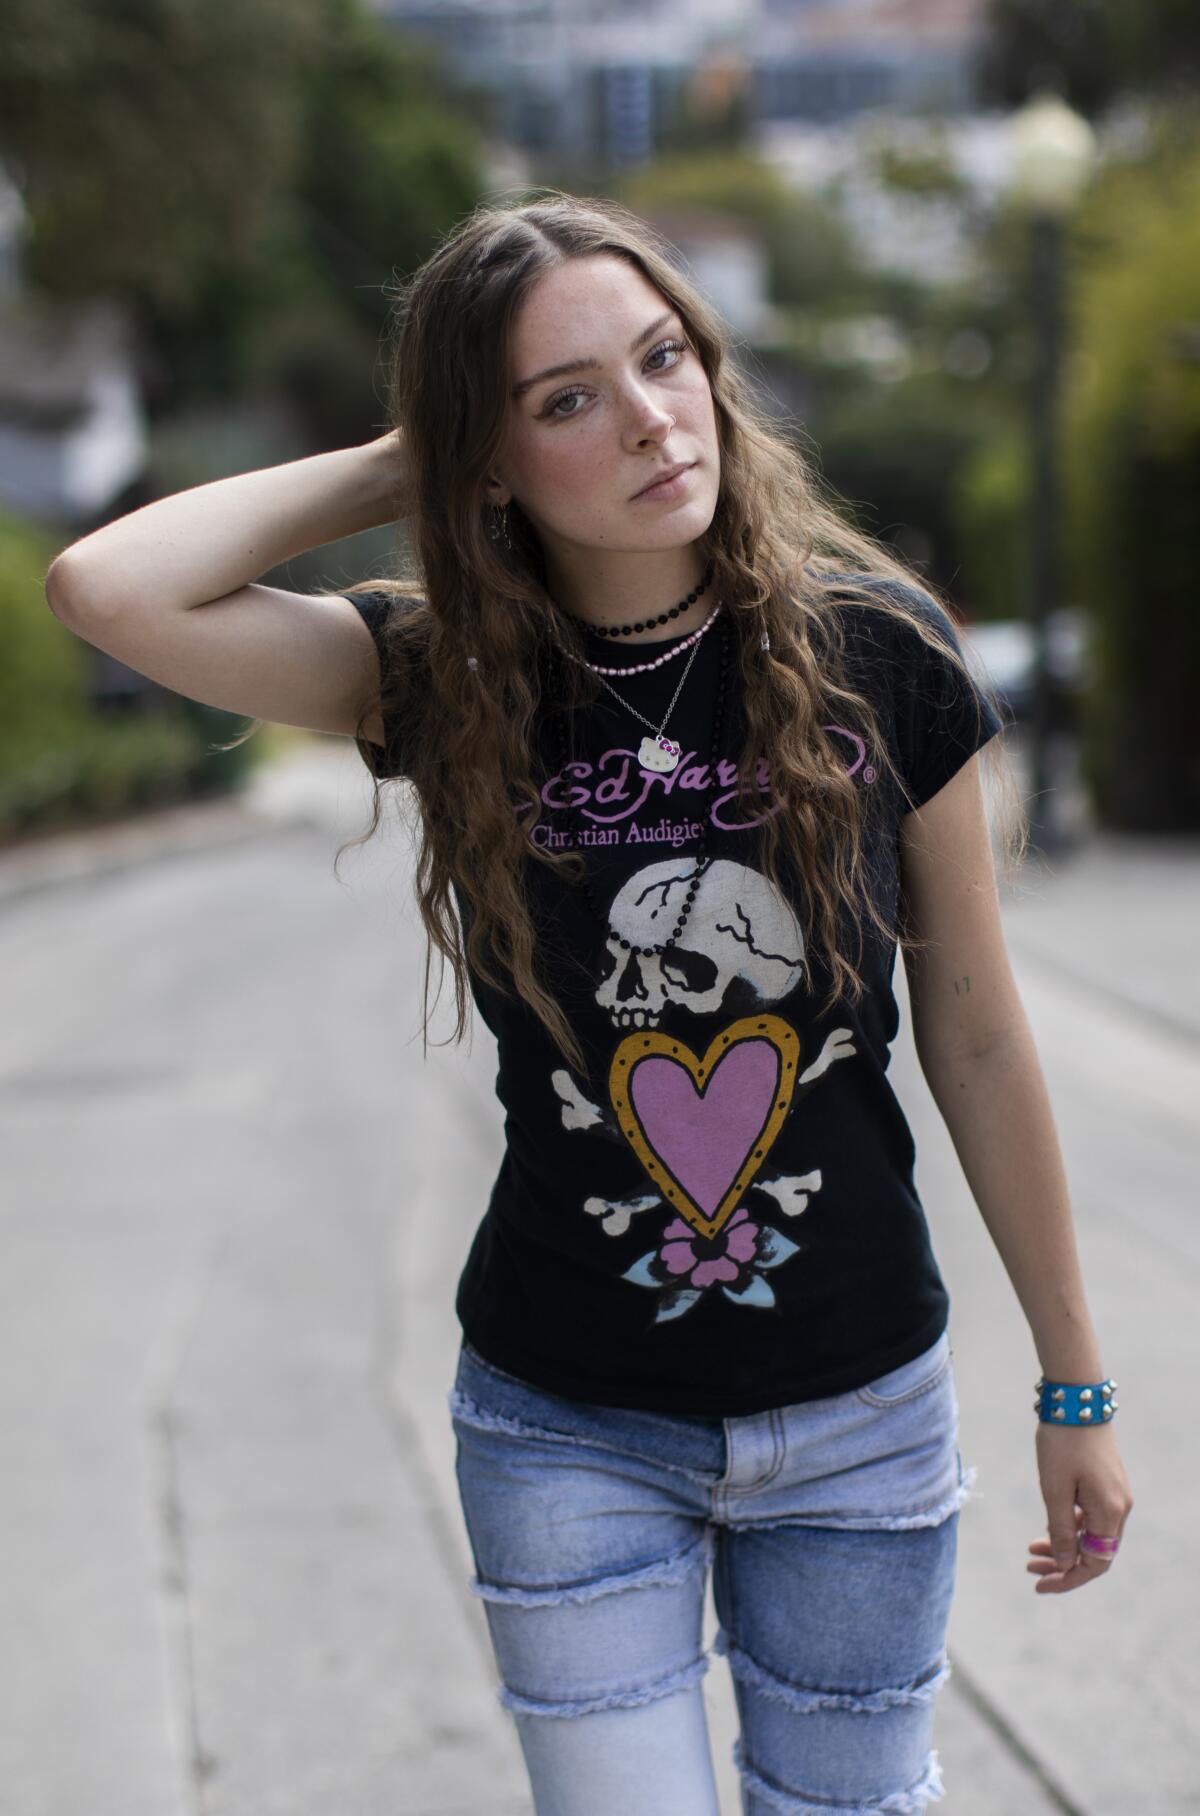 A young woman in T-shirt and jeans, in the middle of an empty street